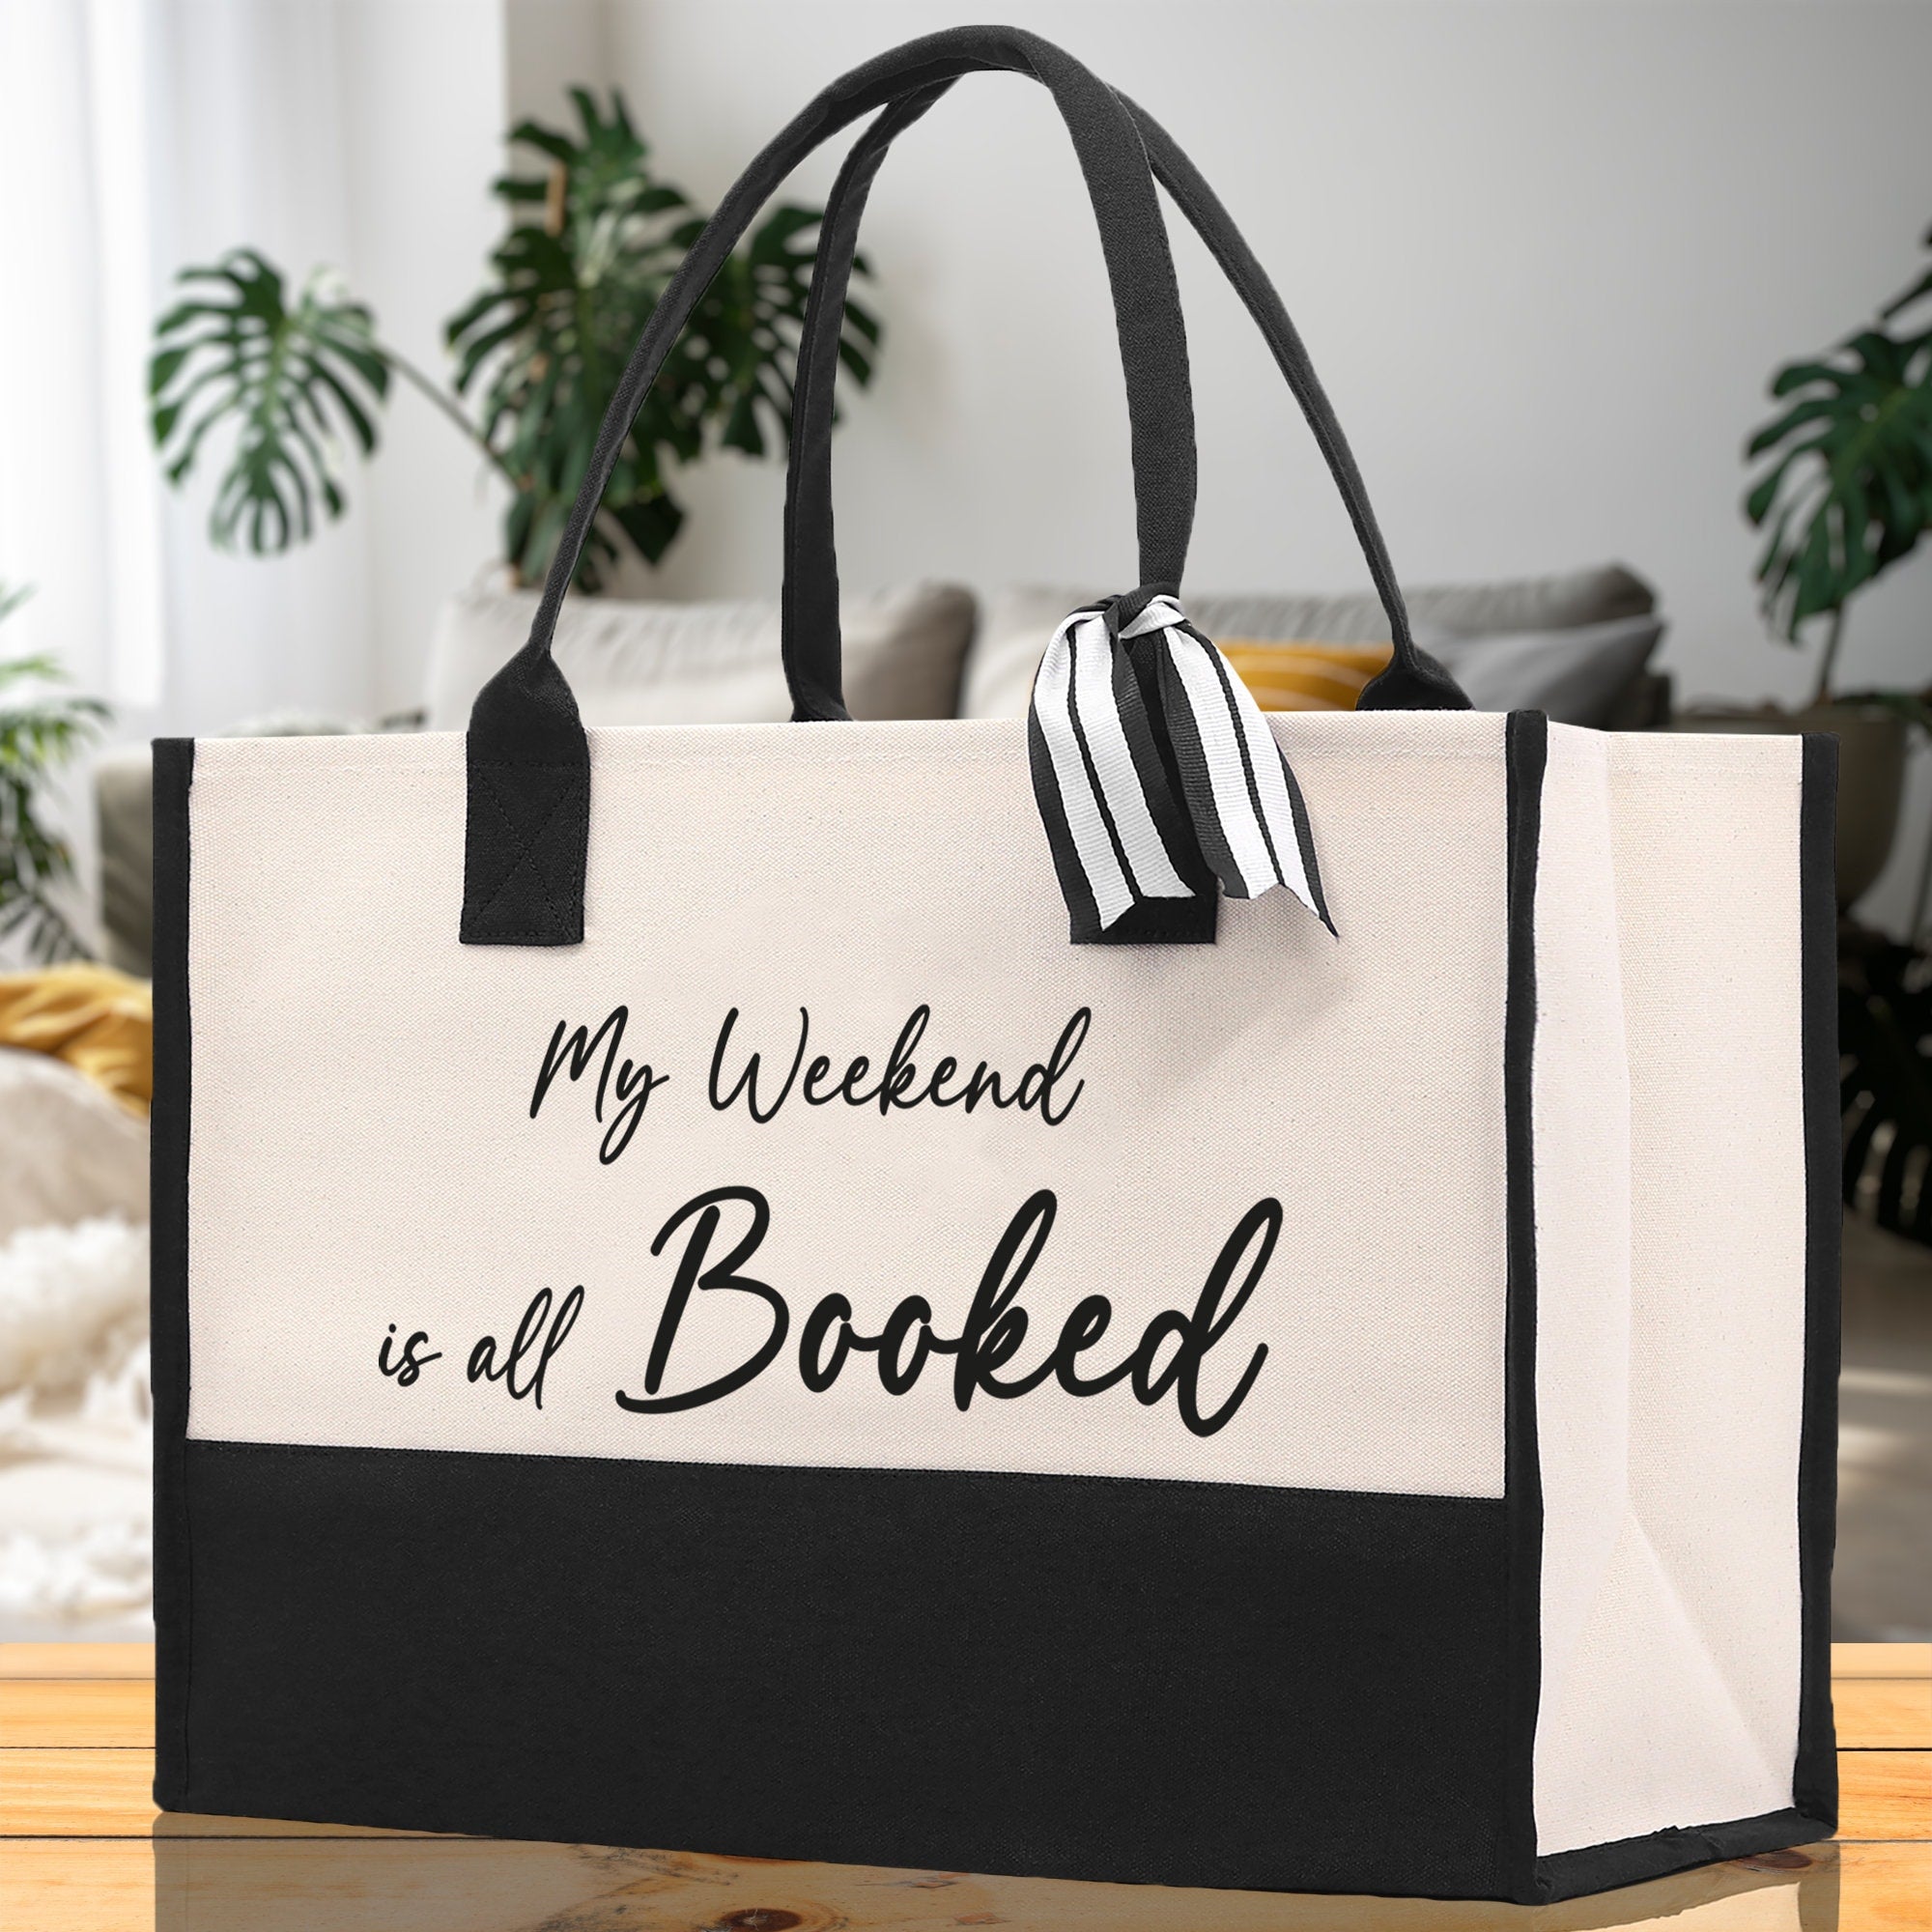 My Weekend Is All Booked Canvas Tote Bag Birthday Gift for Her Weekender Tote Bag Beach Tote Bag Canvas Large Beach Tote Bag Chic Tote Bag